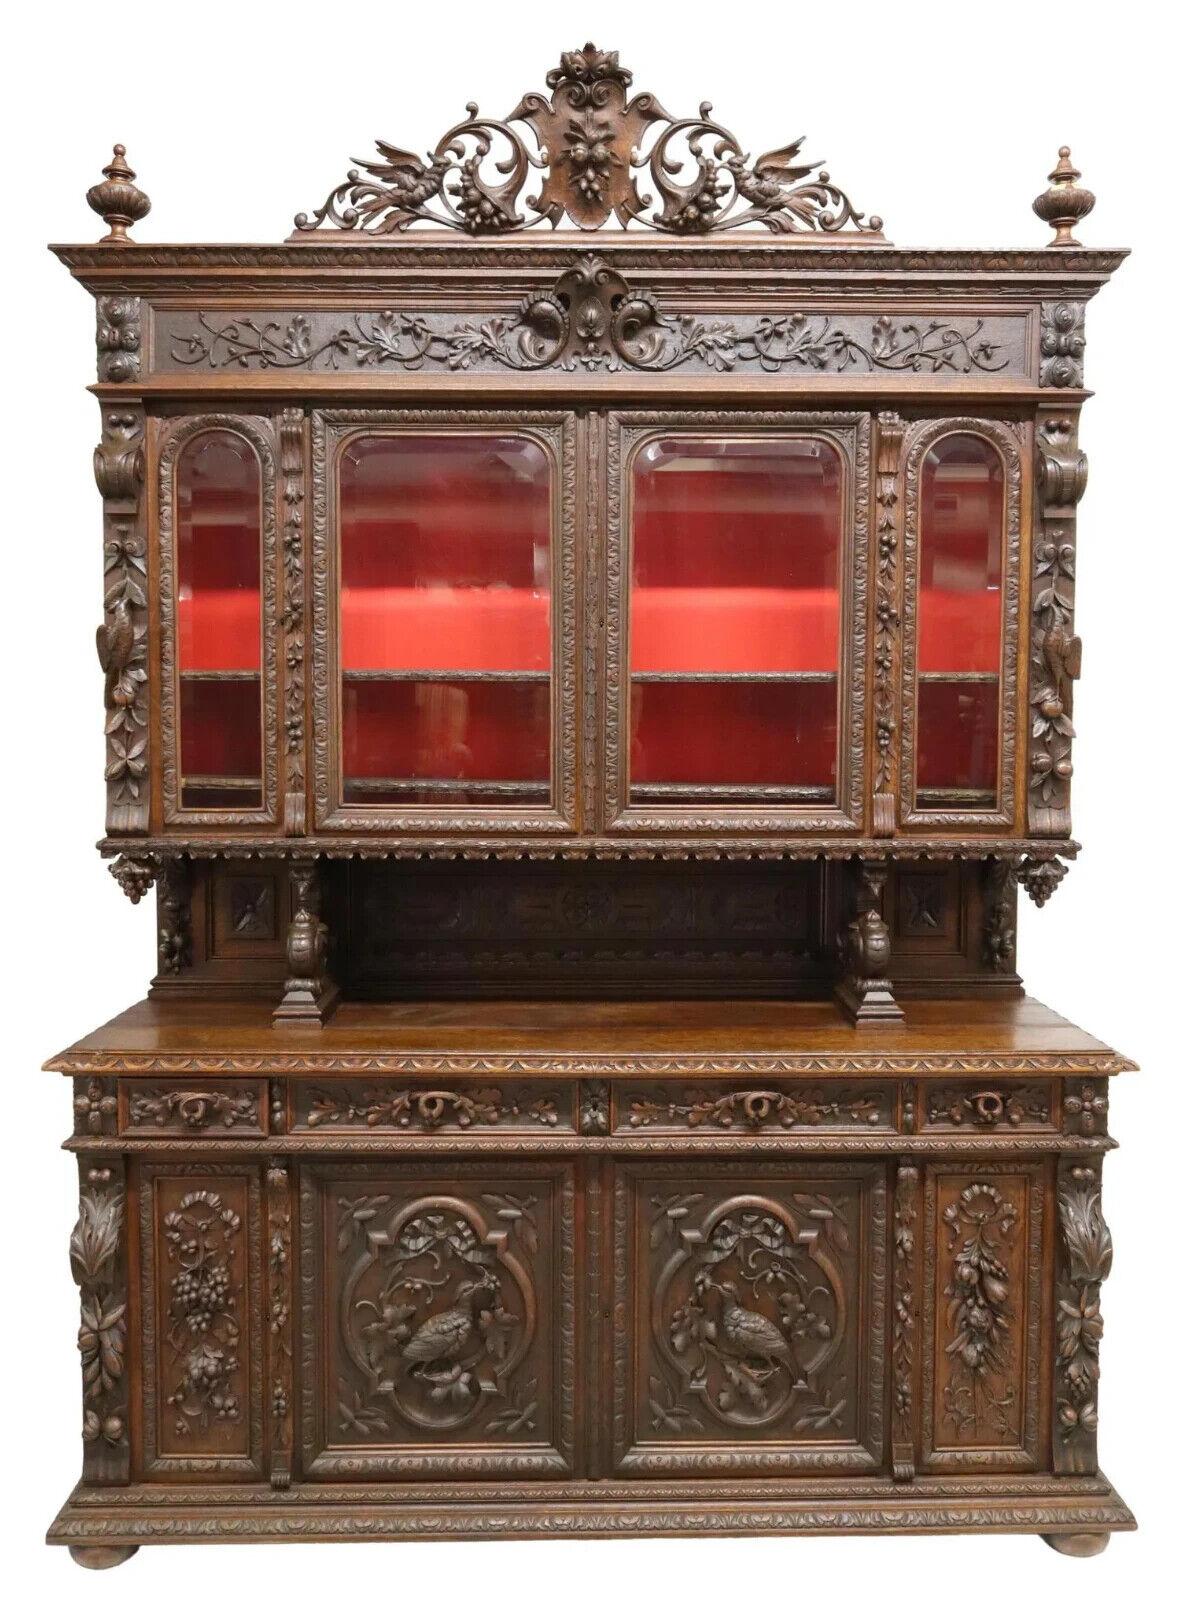 Stunning Antique Sideboard, Hunt, French Henri II Style, Carved, Oak, Beveled Glass , 20th Century, 1900's!

French Henri II style carved oak hunt sideboard, early 20th C., having pierced cartouche and cornucopia crest, four beveled glass doors,